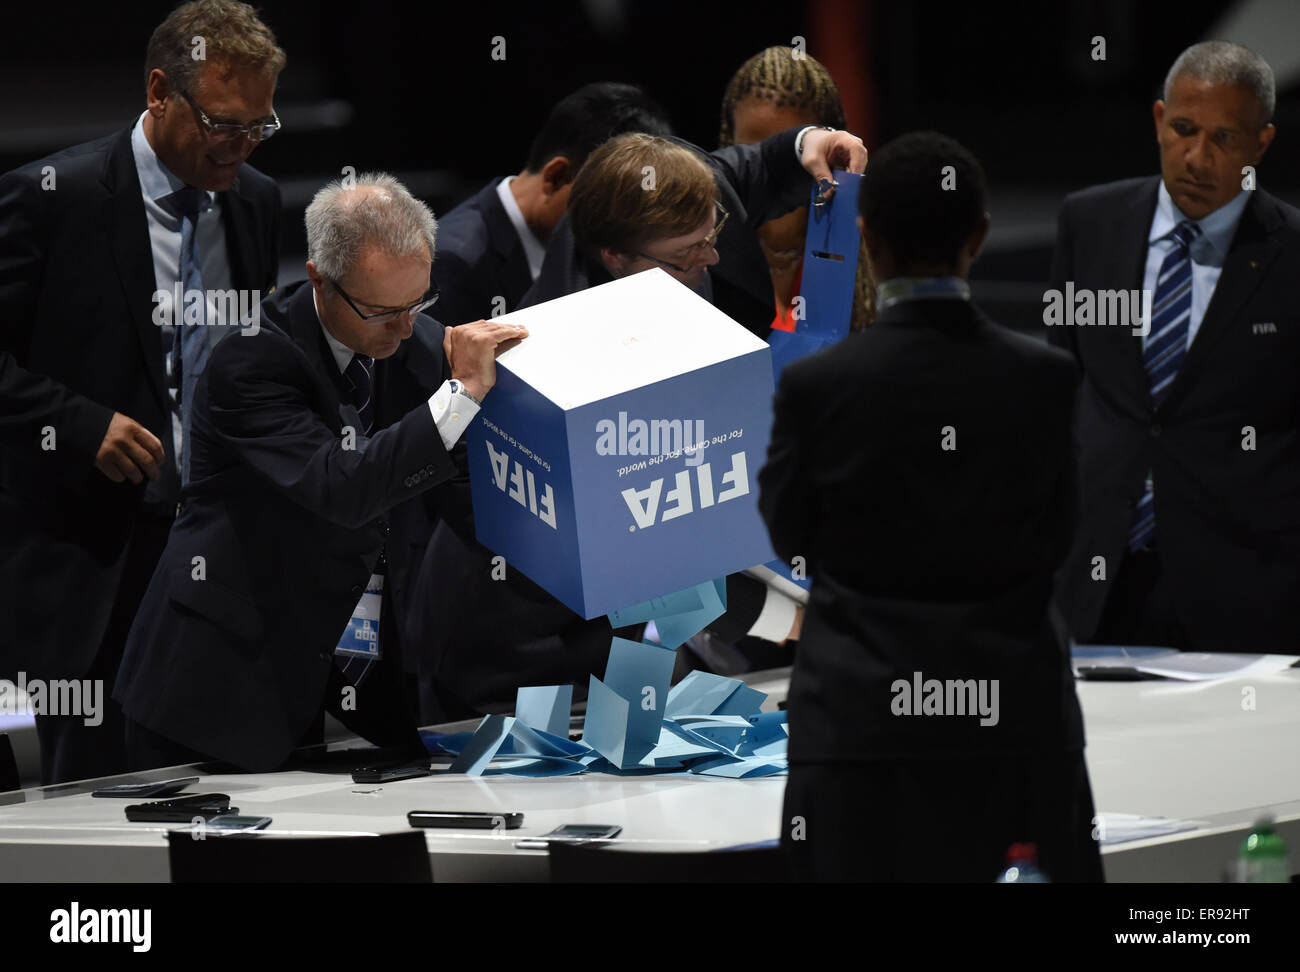 Zurich, Switzerland. 29th May, 2015. Notaries empty ballot boxes after the election of the FIFA president at the 65th FIFA Congress at the Hallenstadion in Zurich, Switzerland, 29 May 2015. Photo: Patrick Seeger/dpa/Alamy Live News Stock Photo